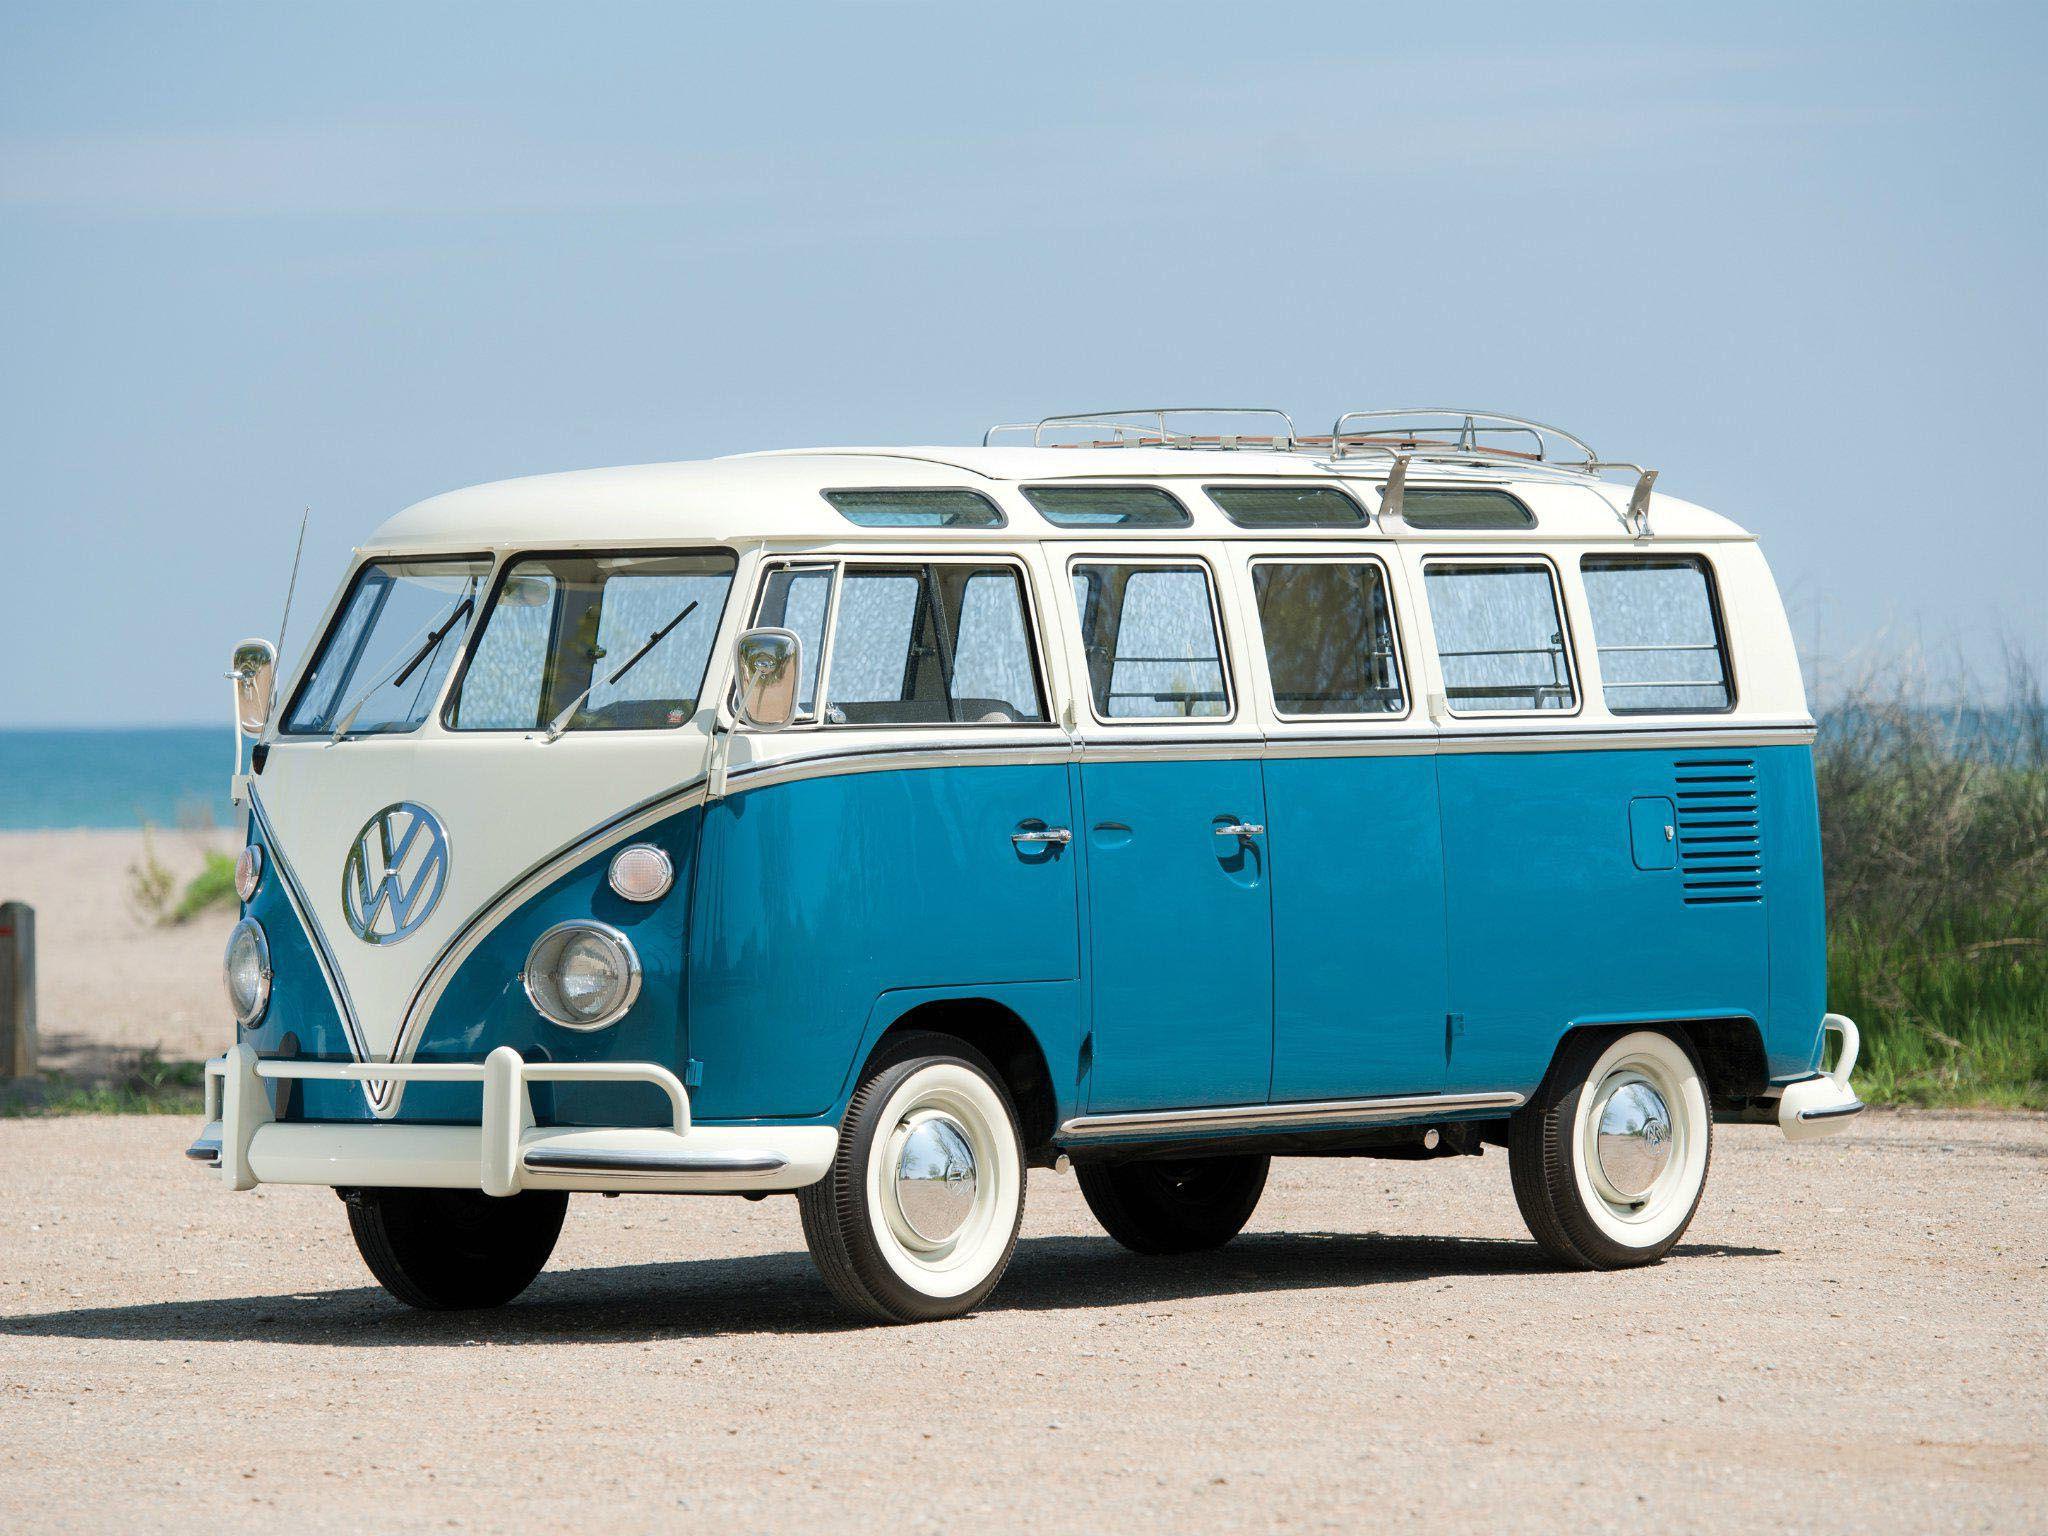 Classic Wallpaper Volkswagen Bus. All About Gallery Car